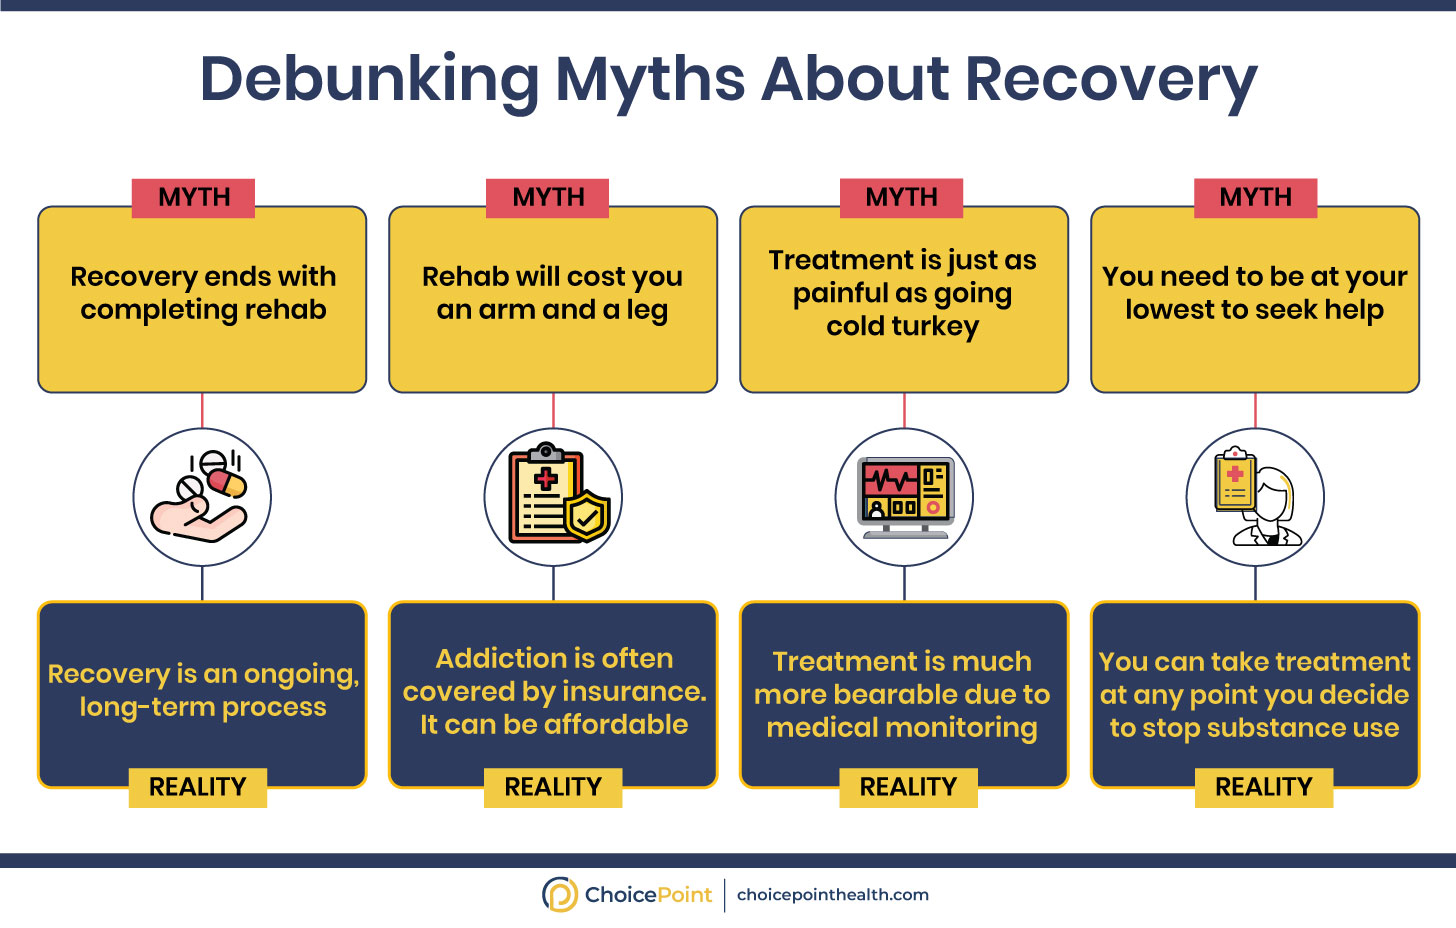 Addressing and Debunking Myths About Addiction Treatment